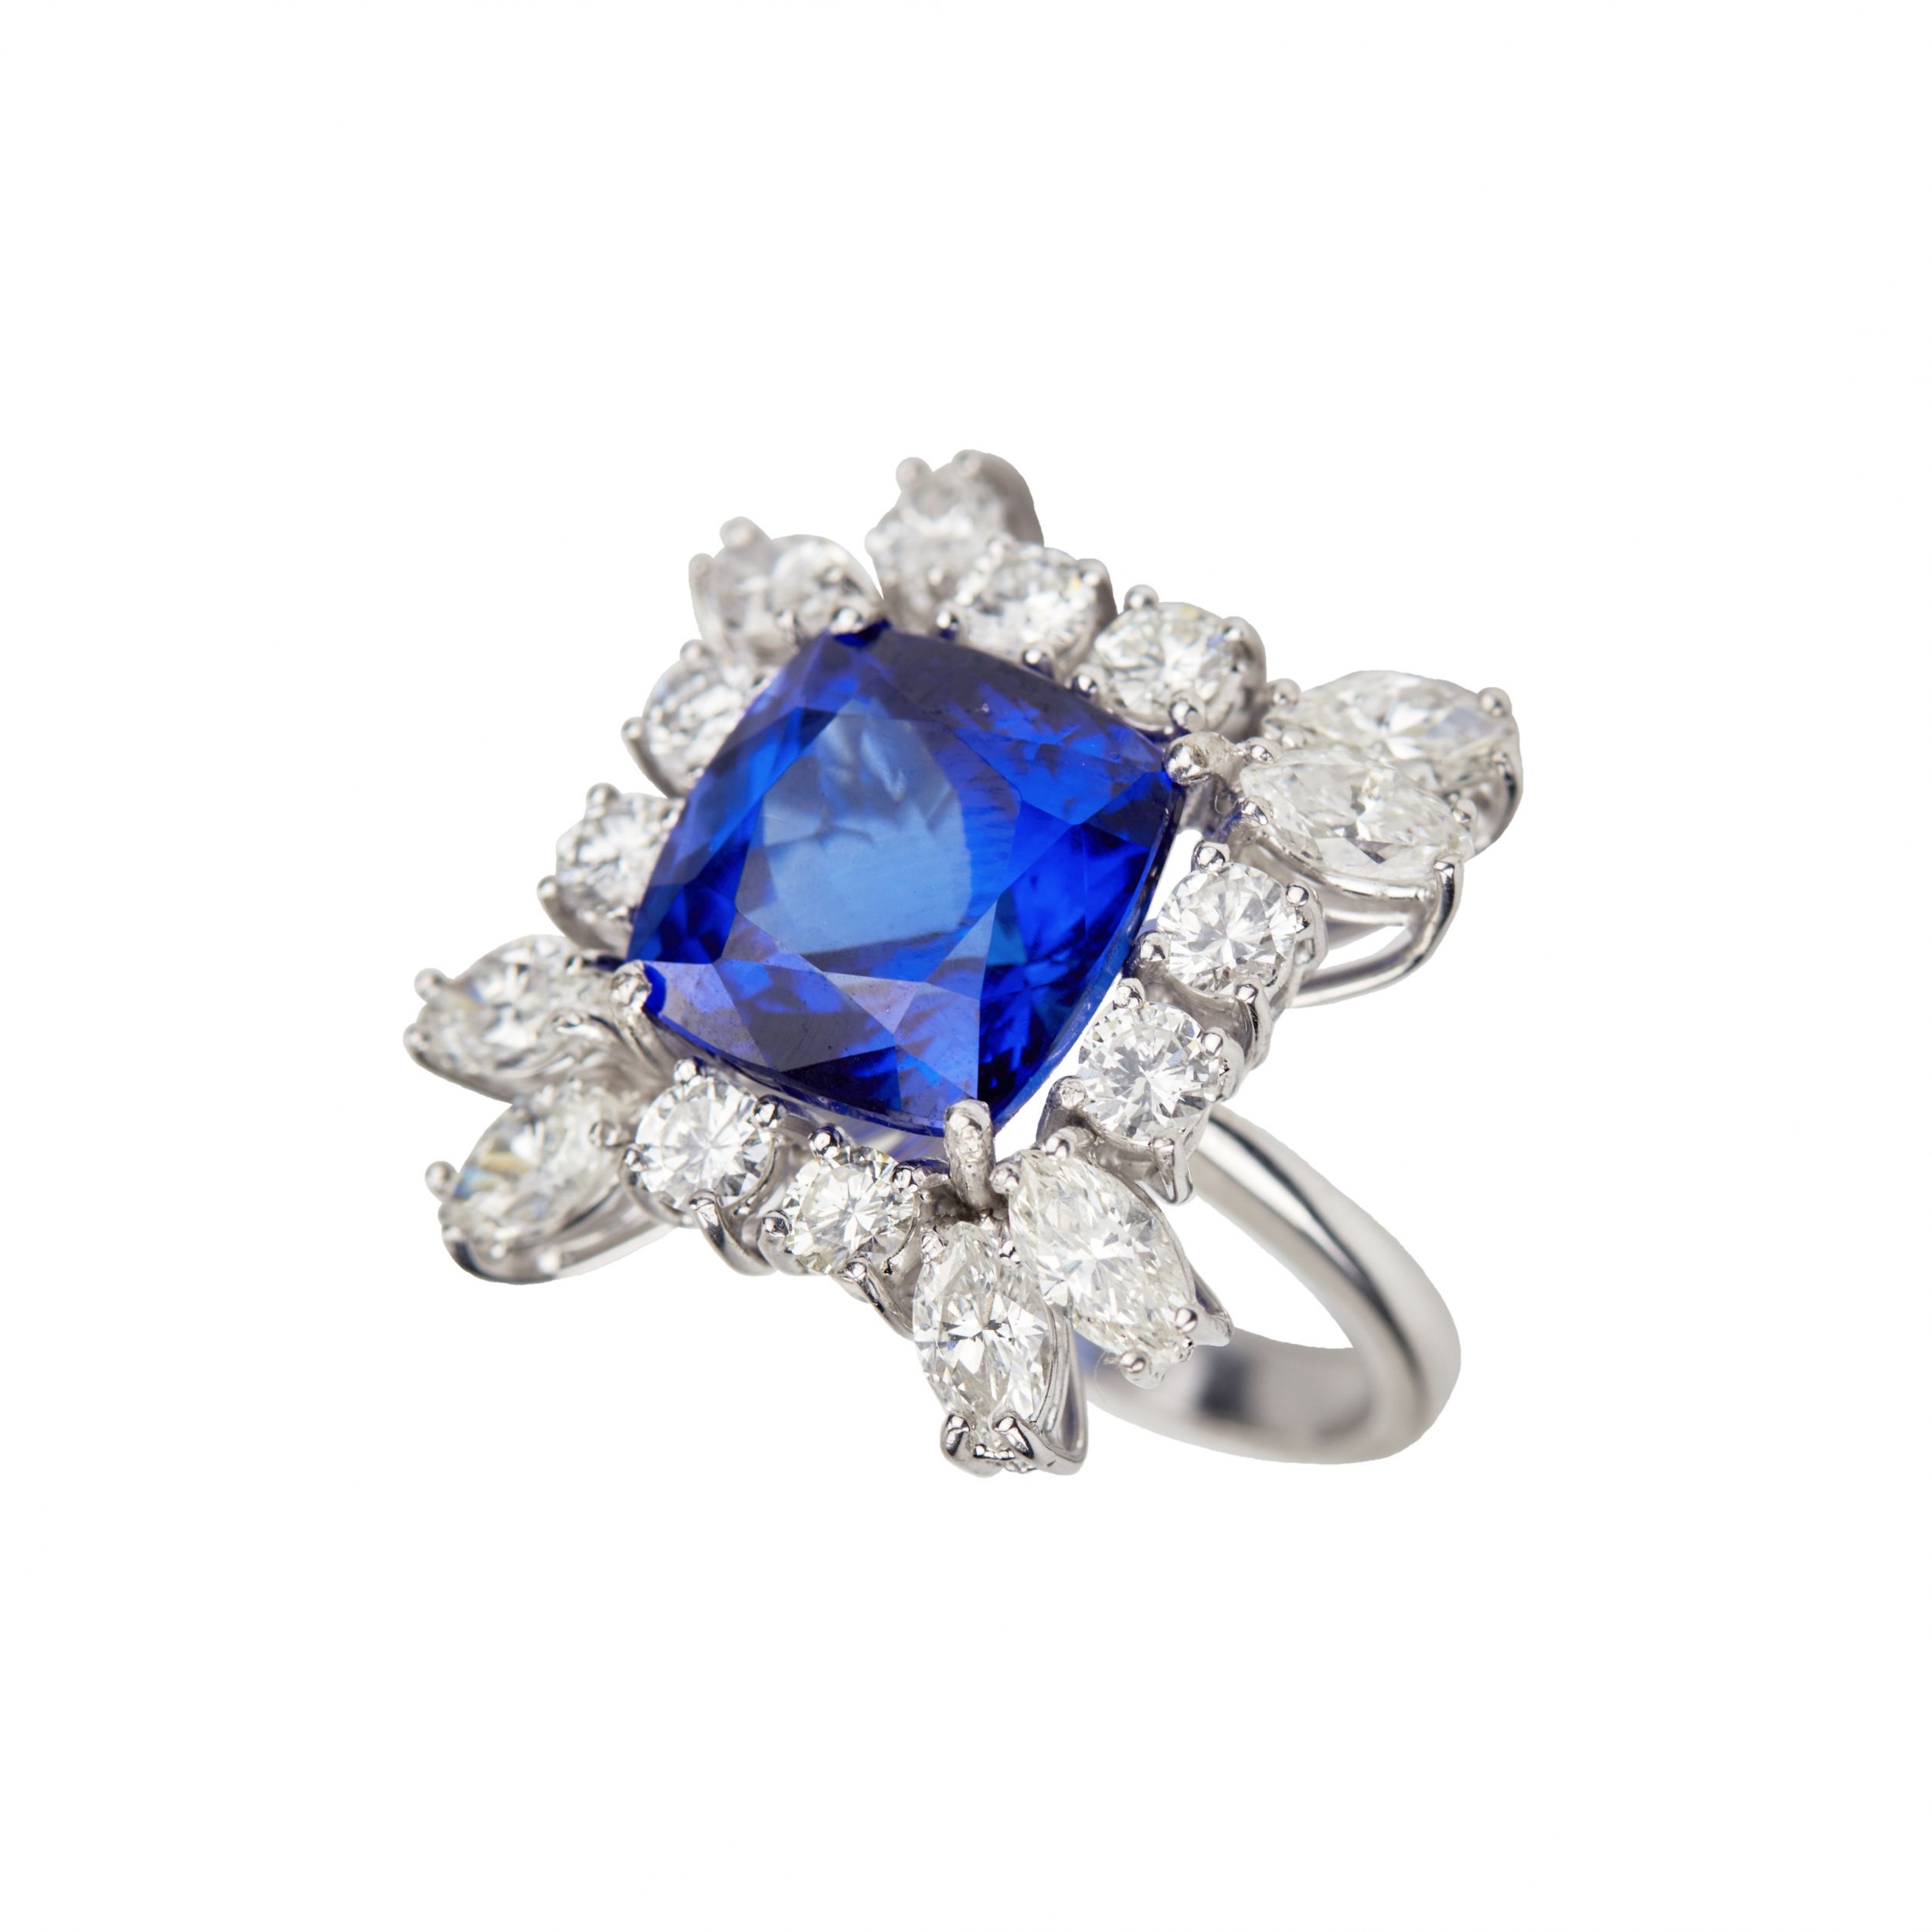 Gold ring with tanzanite and diamonds. - Image 2 of 8